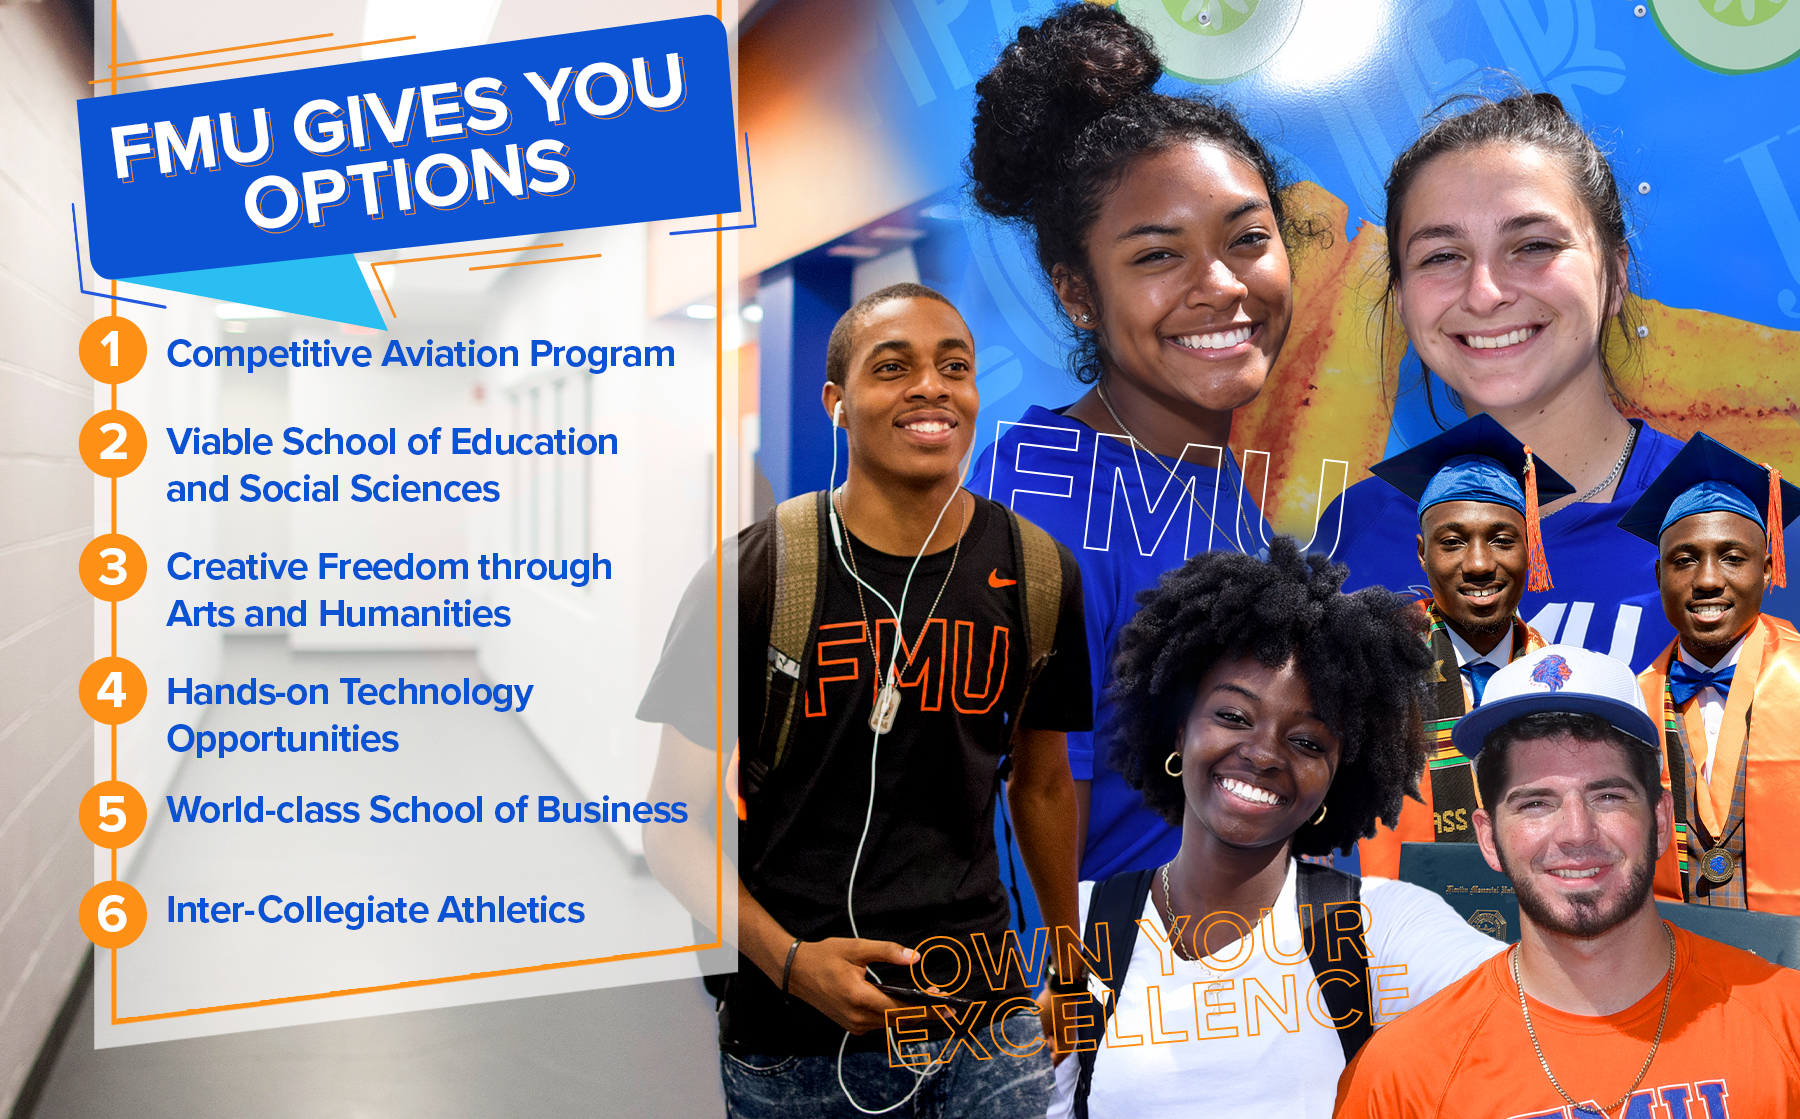 FMU gives you options